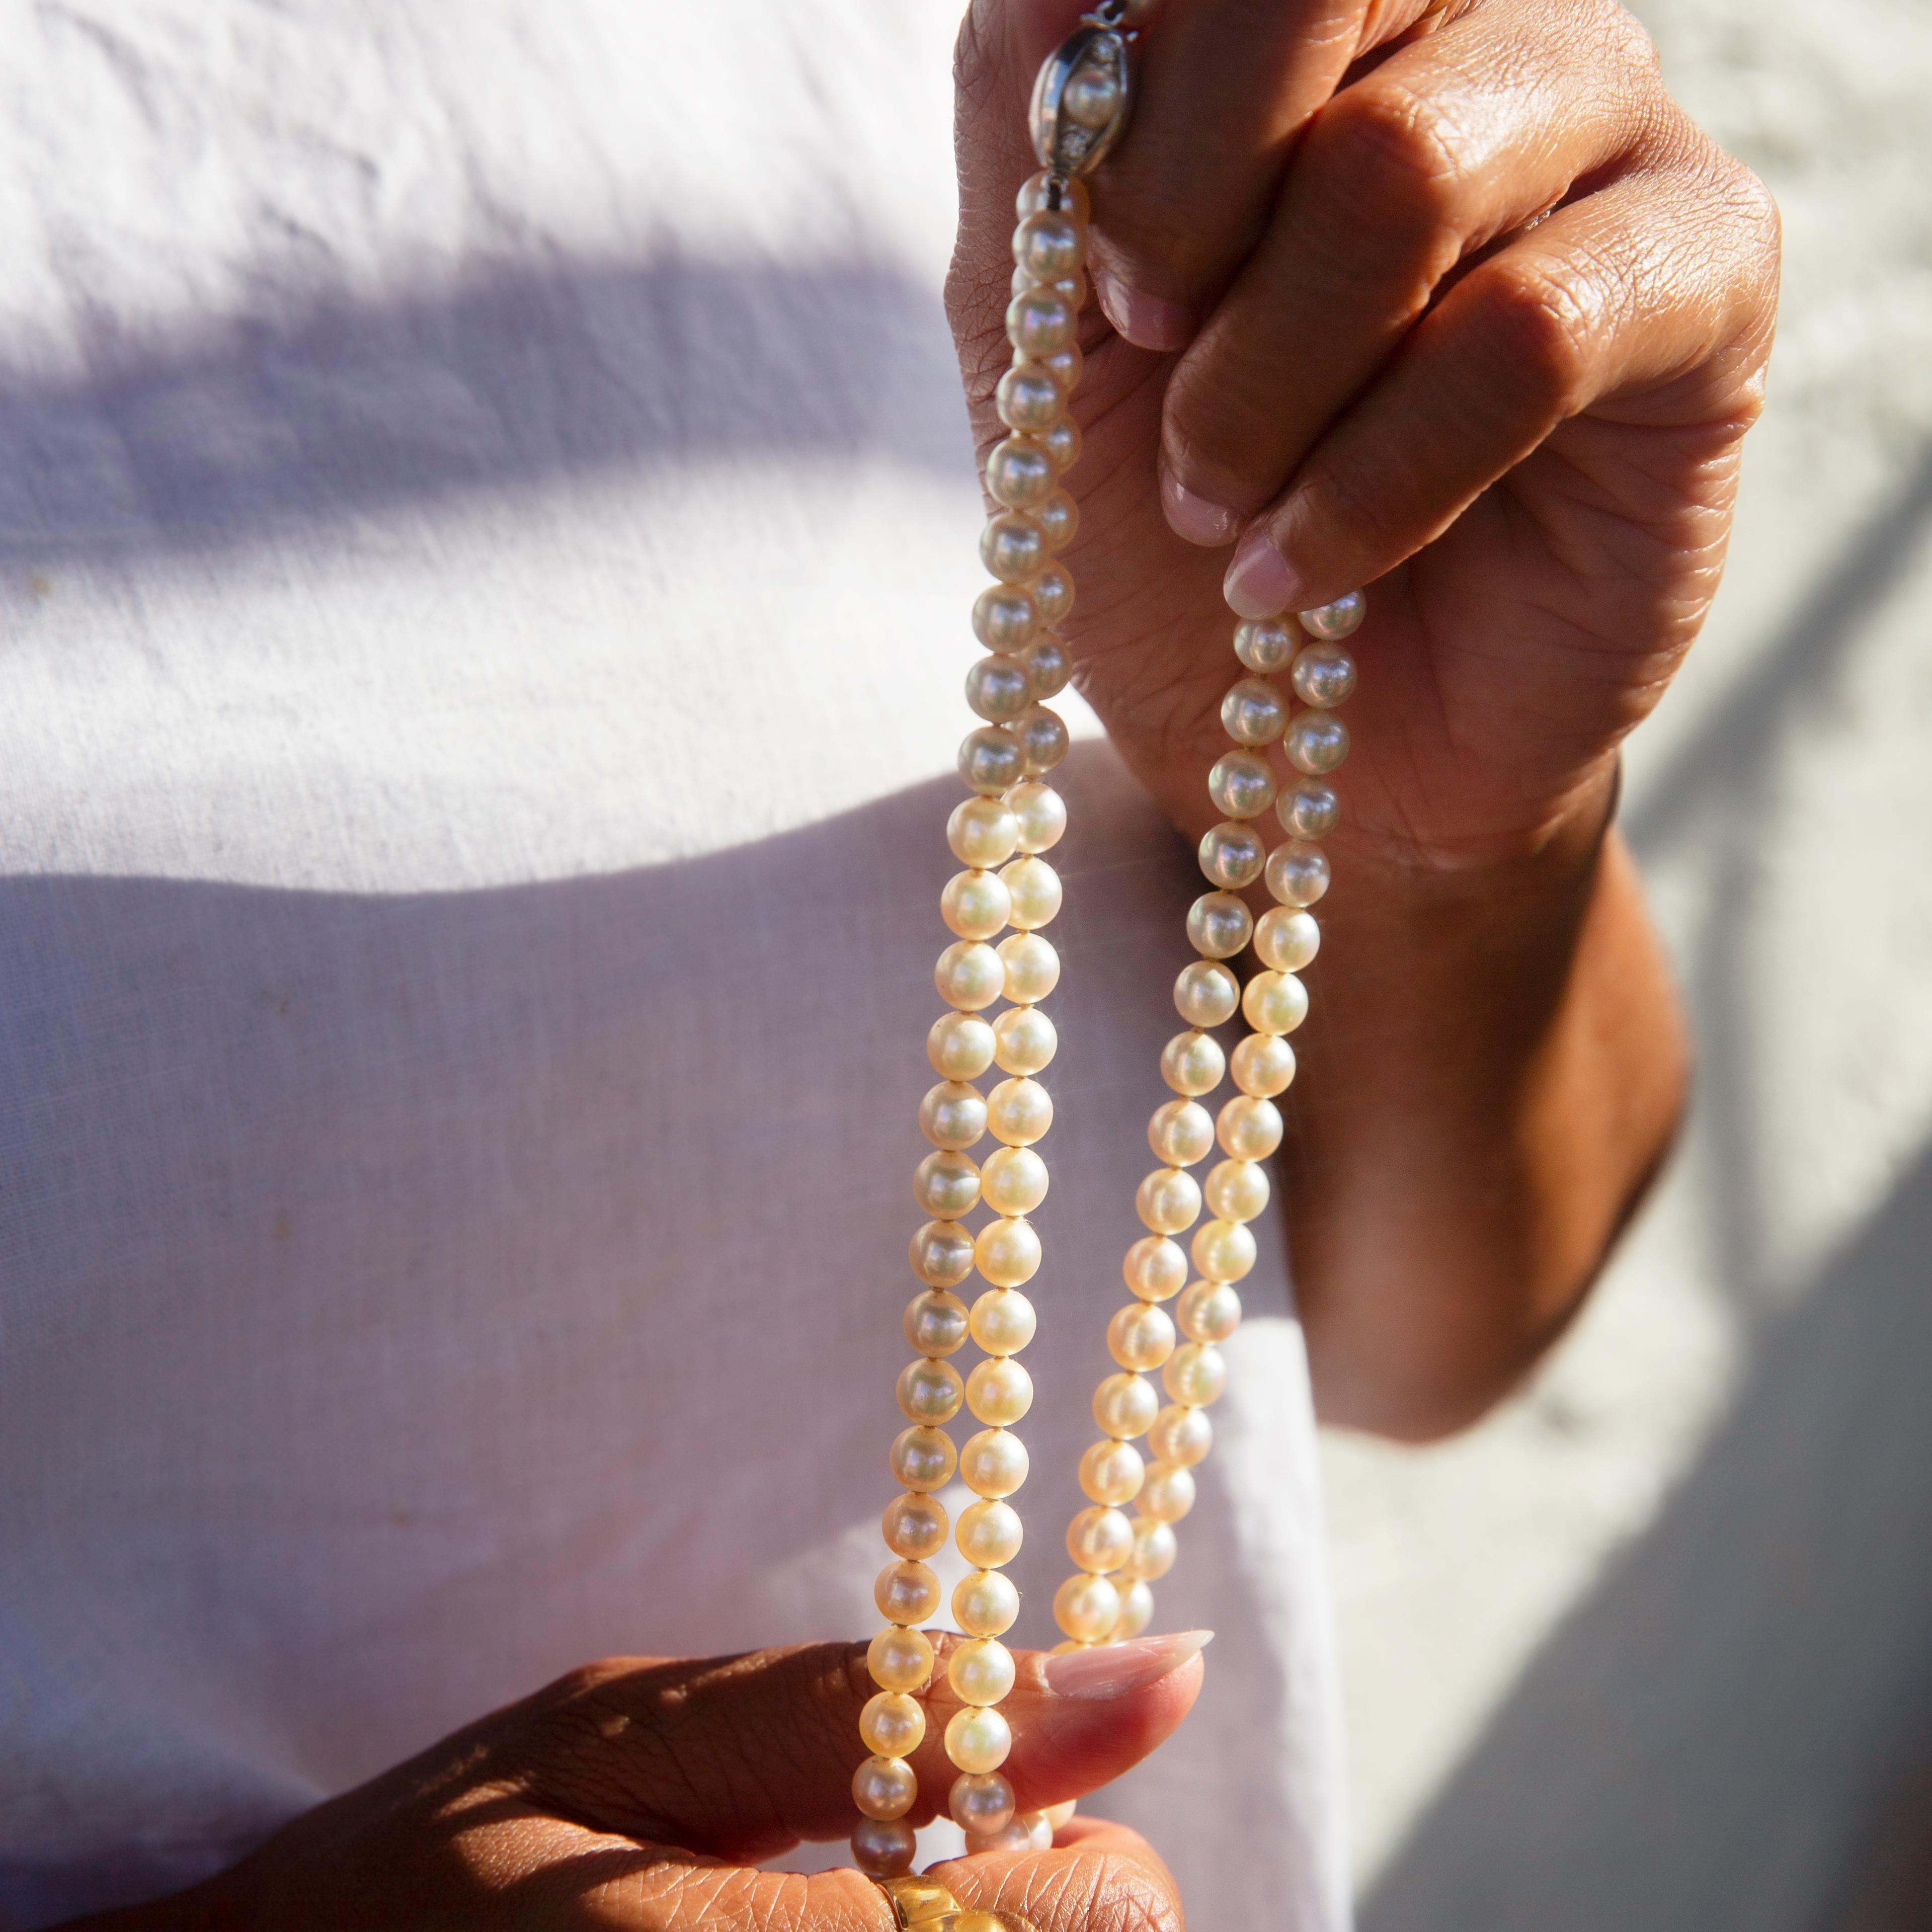 Thoughtfully strung together, this gorgeous strand of round cream-coloured cultured pearls pulsates with high lustre. We have named this stunningly elegant piece The Ziyi Necklace. Lovely for wearing any time or place, she is finished with a lovely